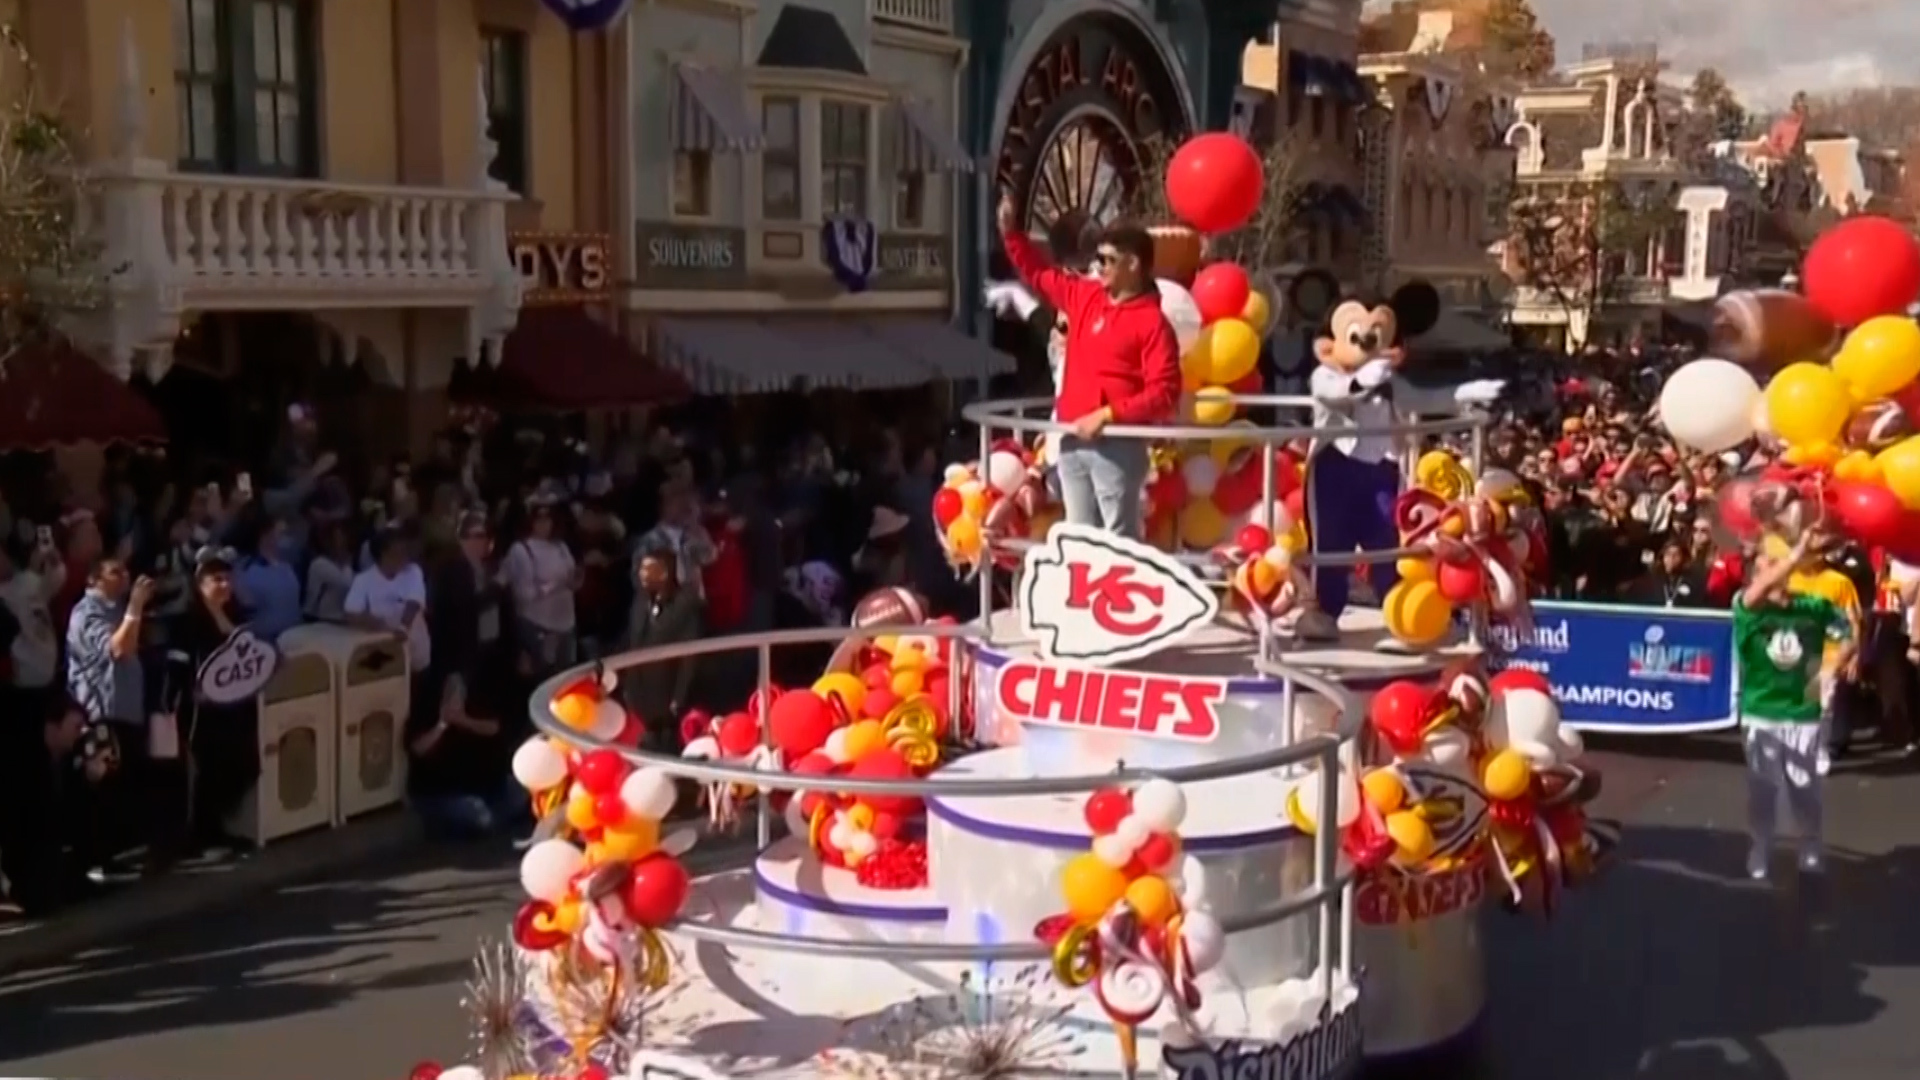 Patrick Mahomes celebrates Super Bowl victory at Disneyland with his wife and children